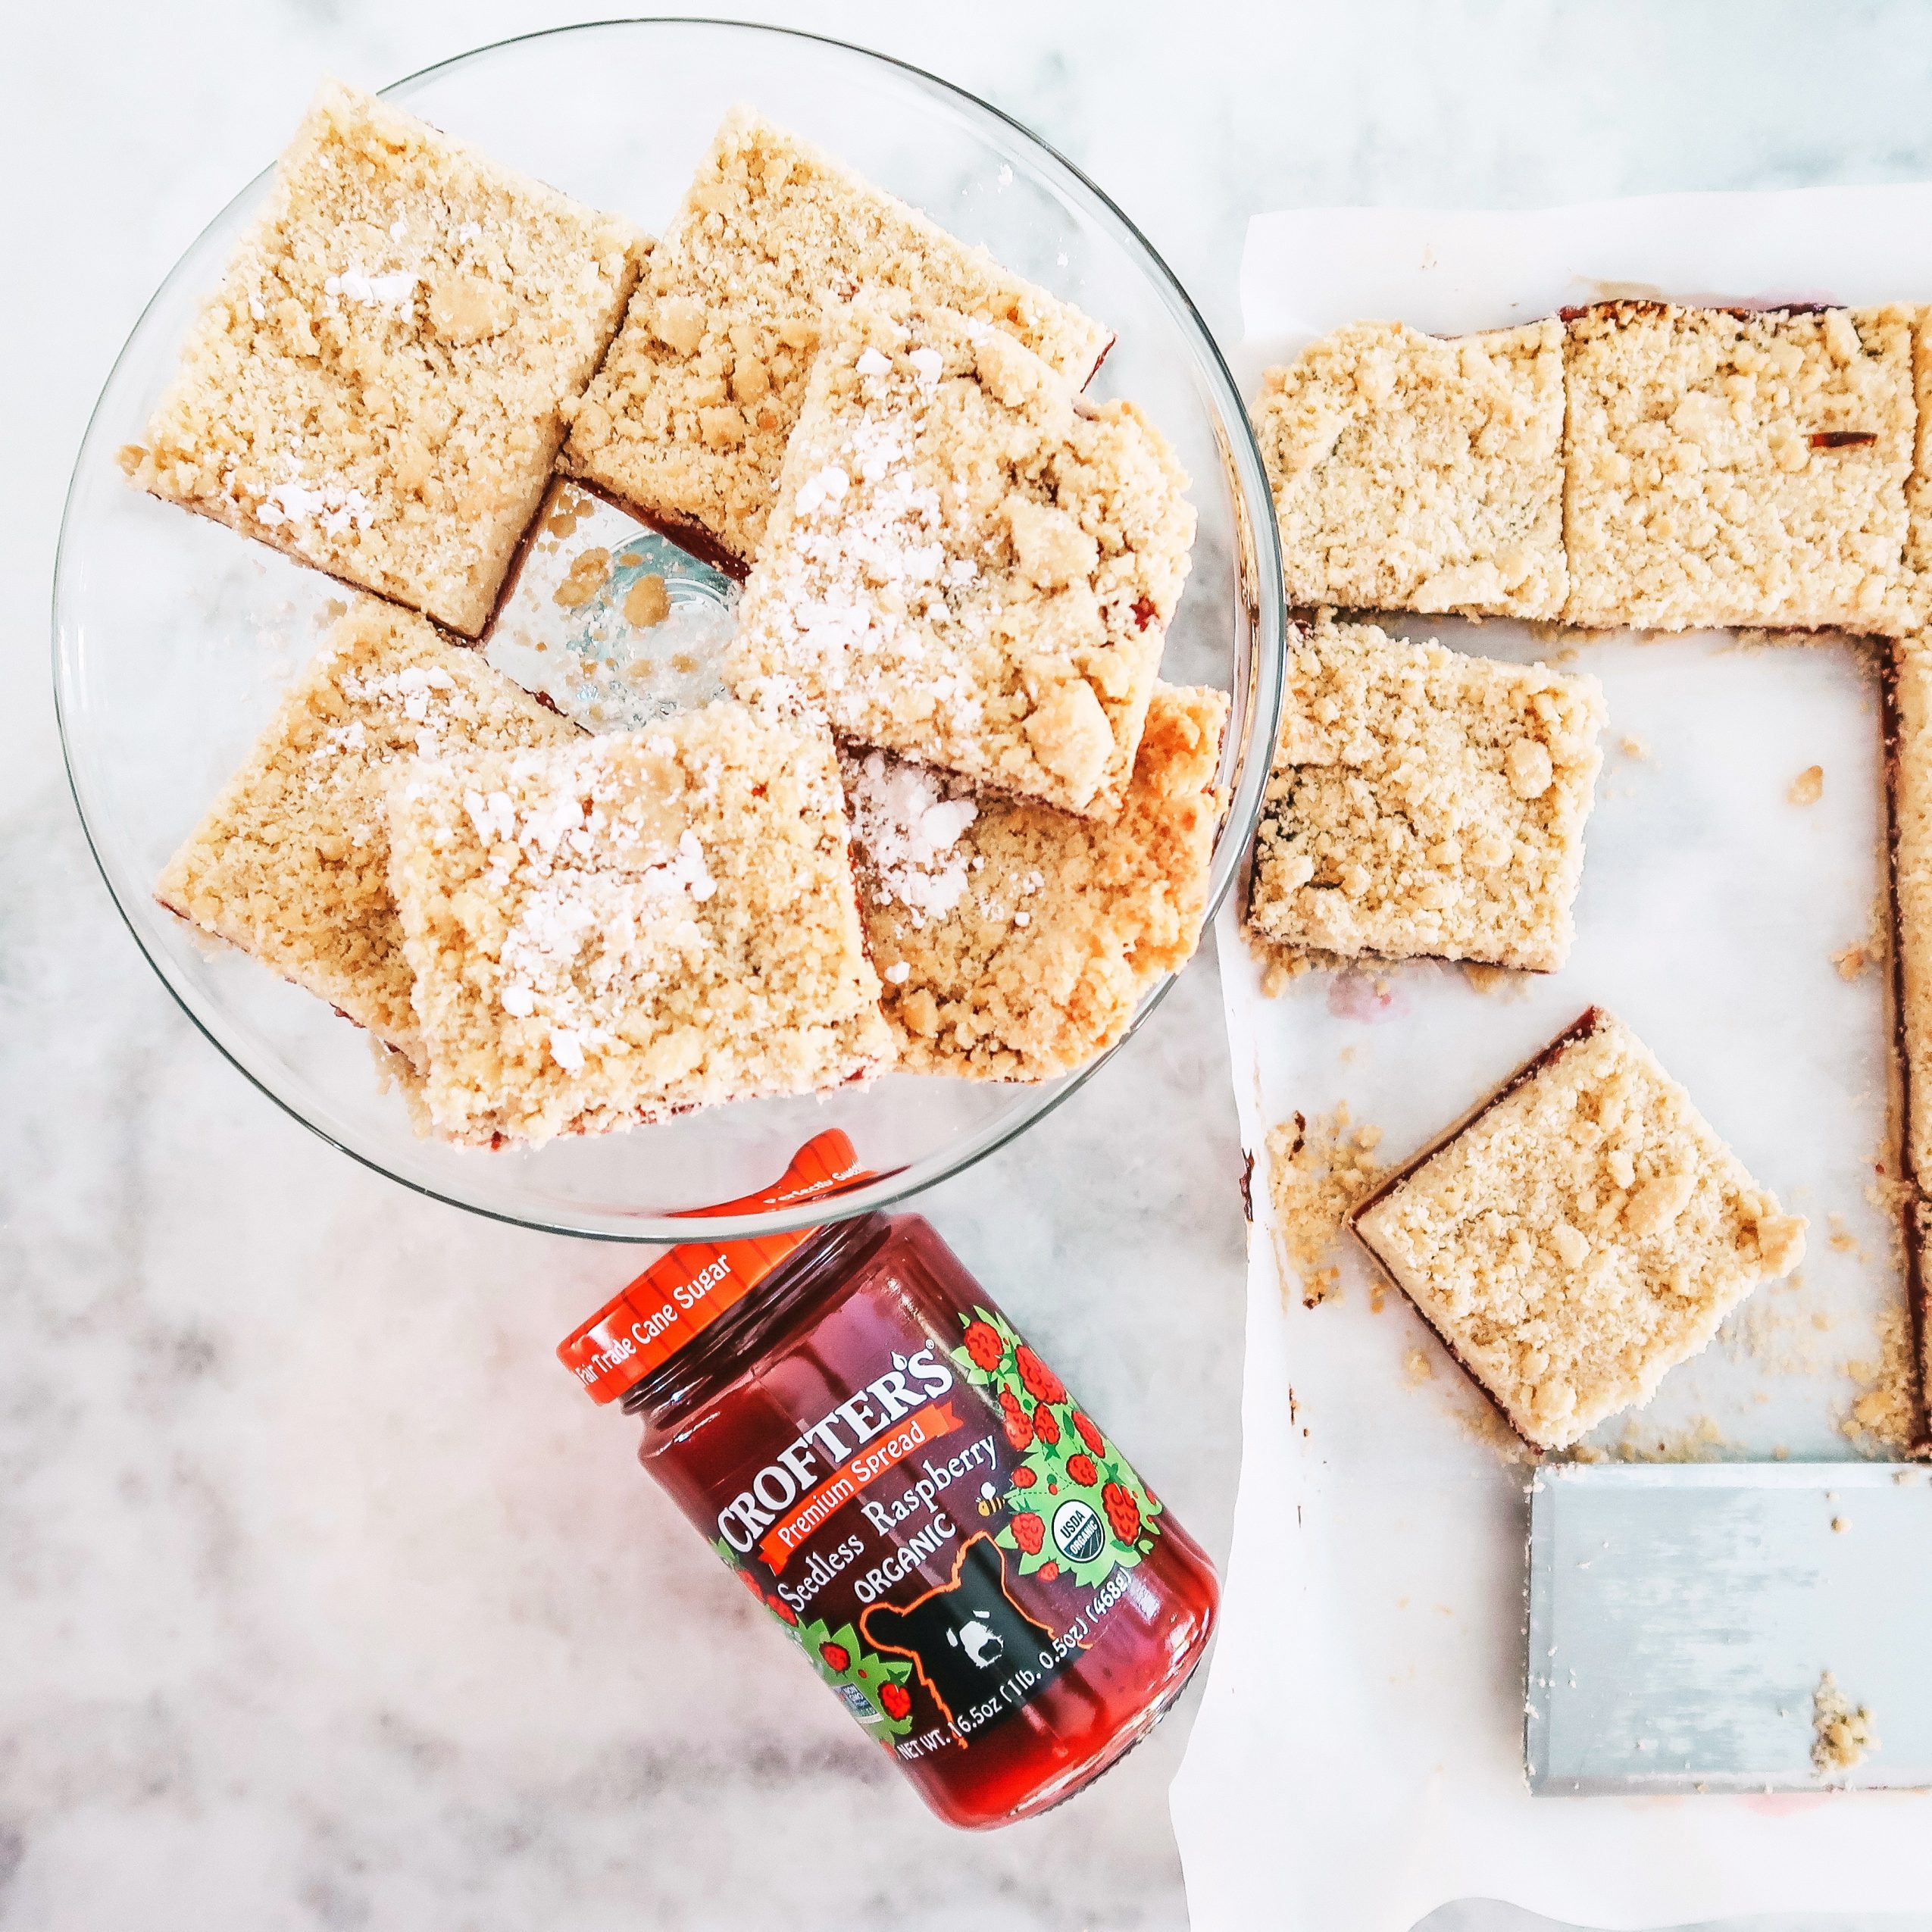 Rasberry Shortbread Bars made with Crofter's Fruit Spread